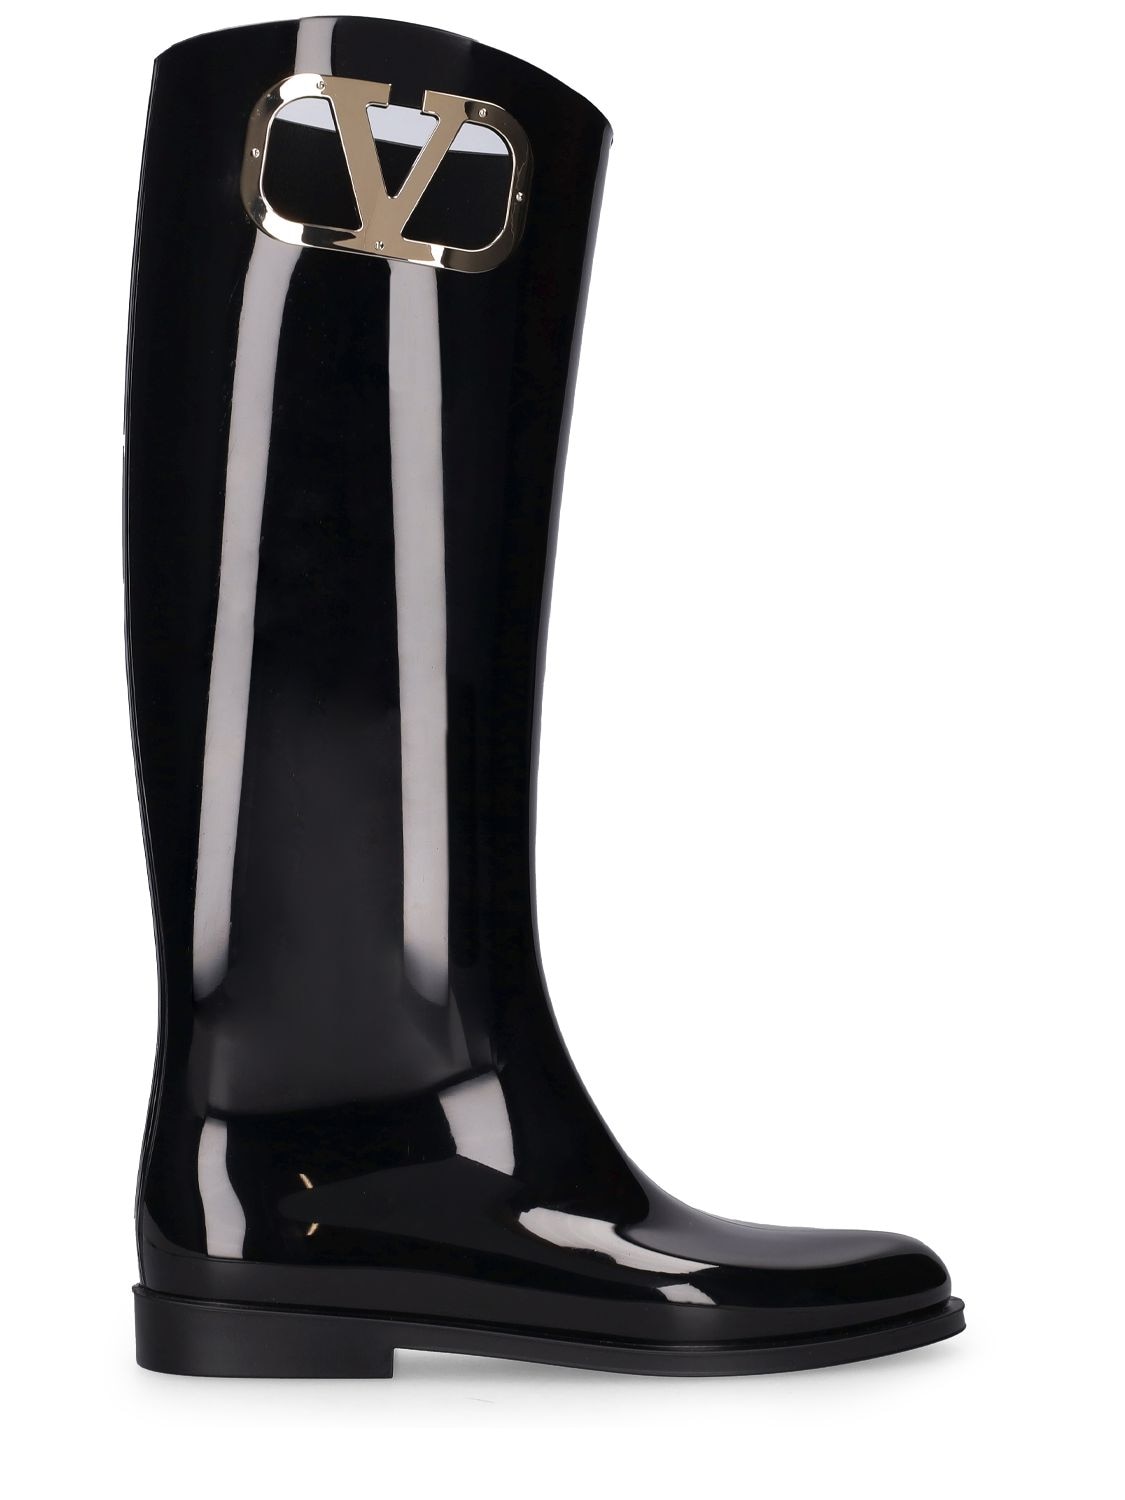 20mm Vlogo Pvc Tall Boots – WOMEN > SHOES > BOOTS